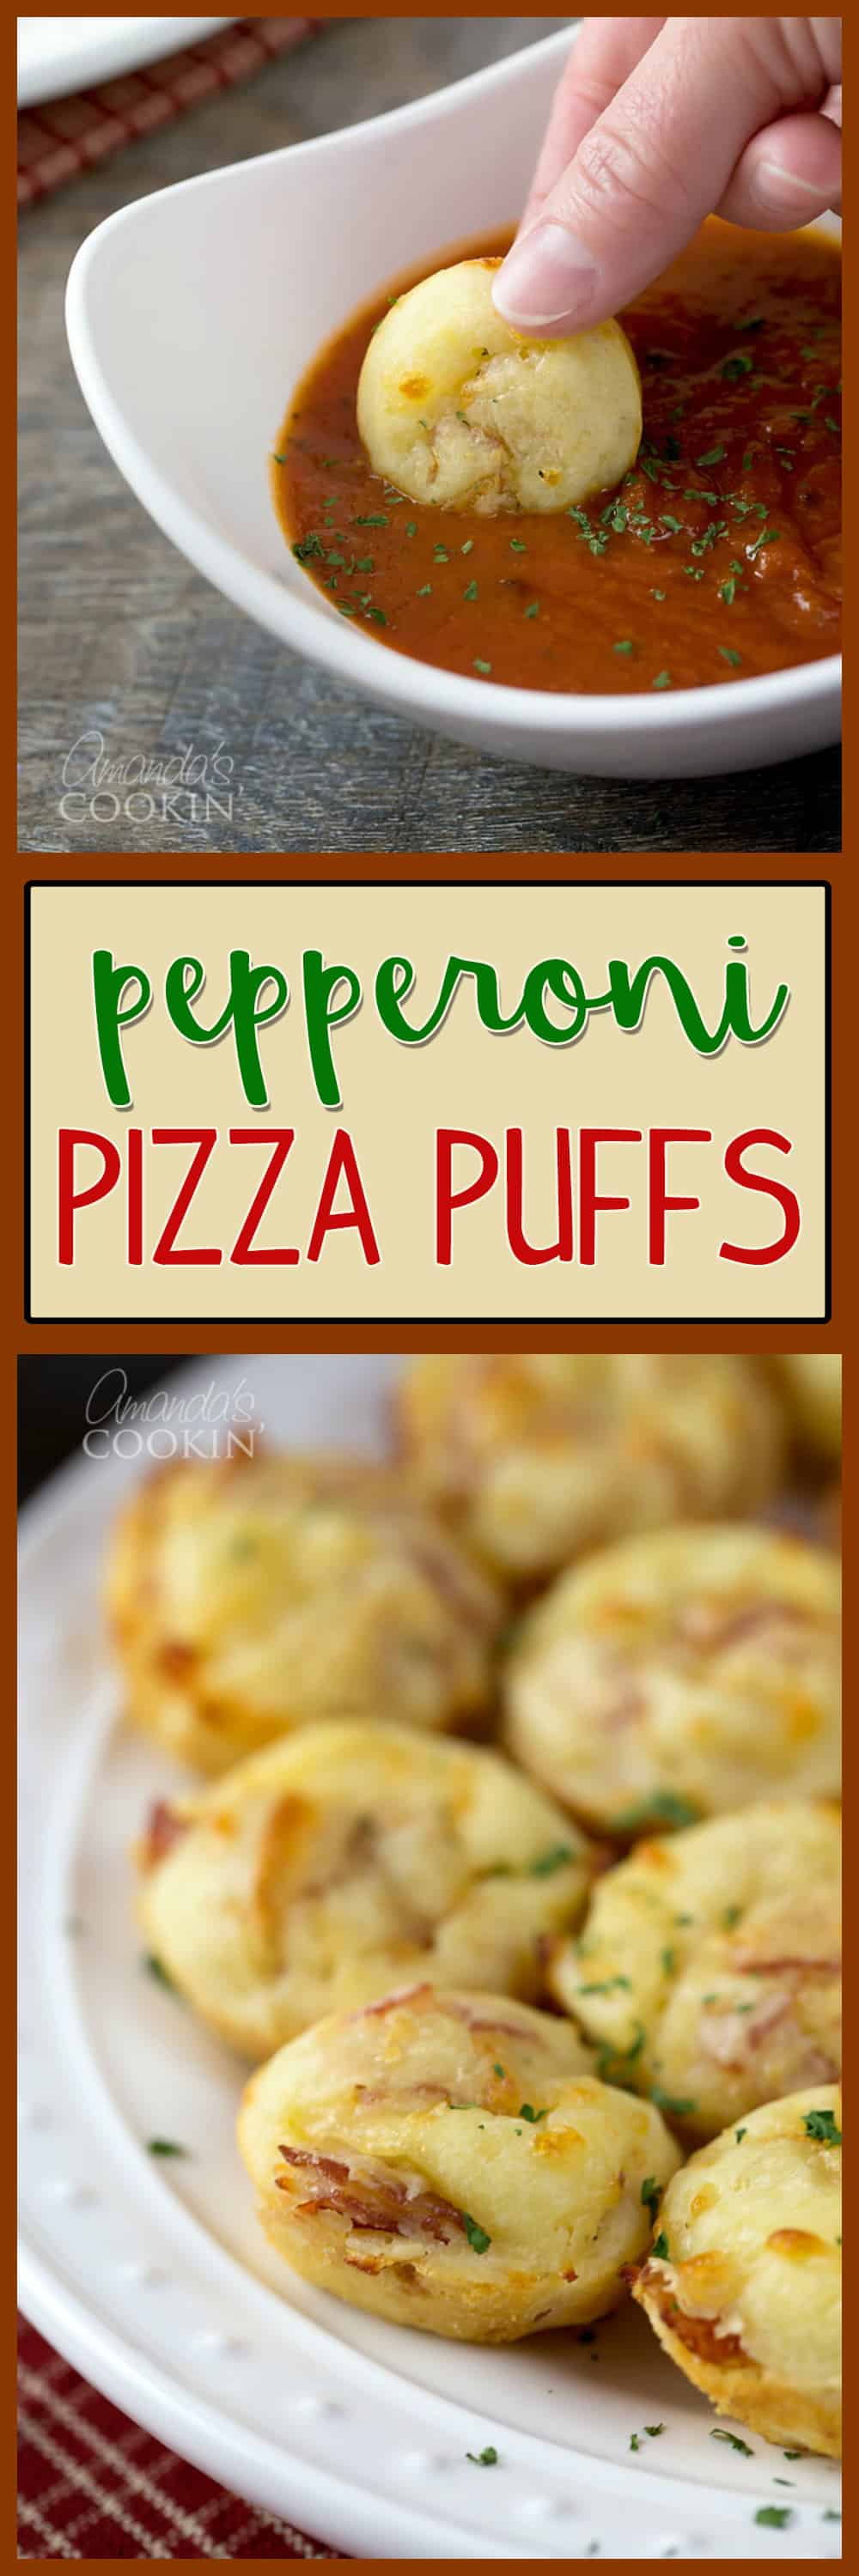 A photo of pepperoni pizza puffs.